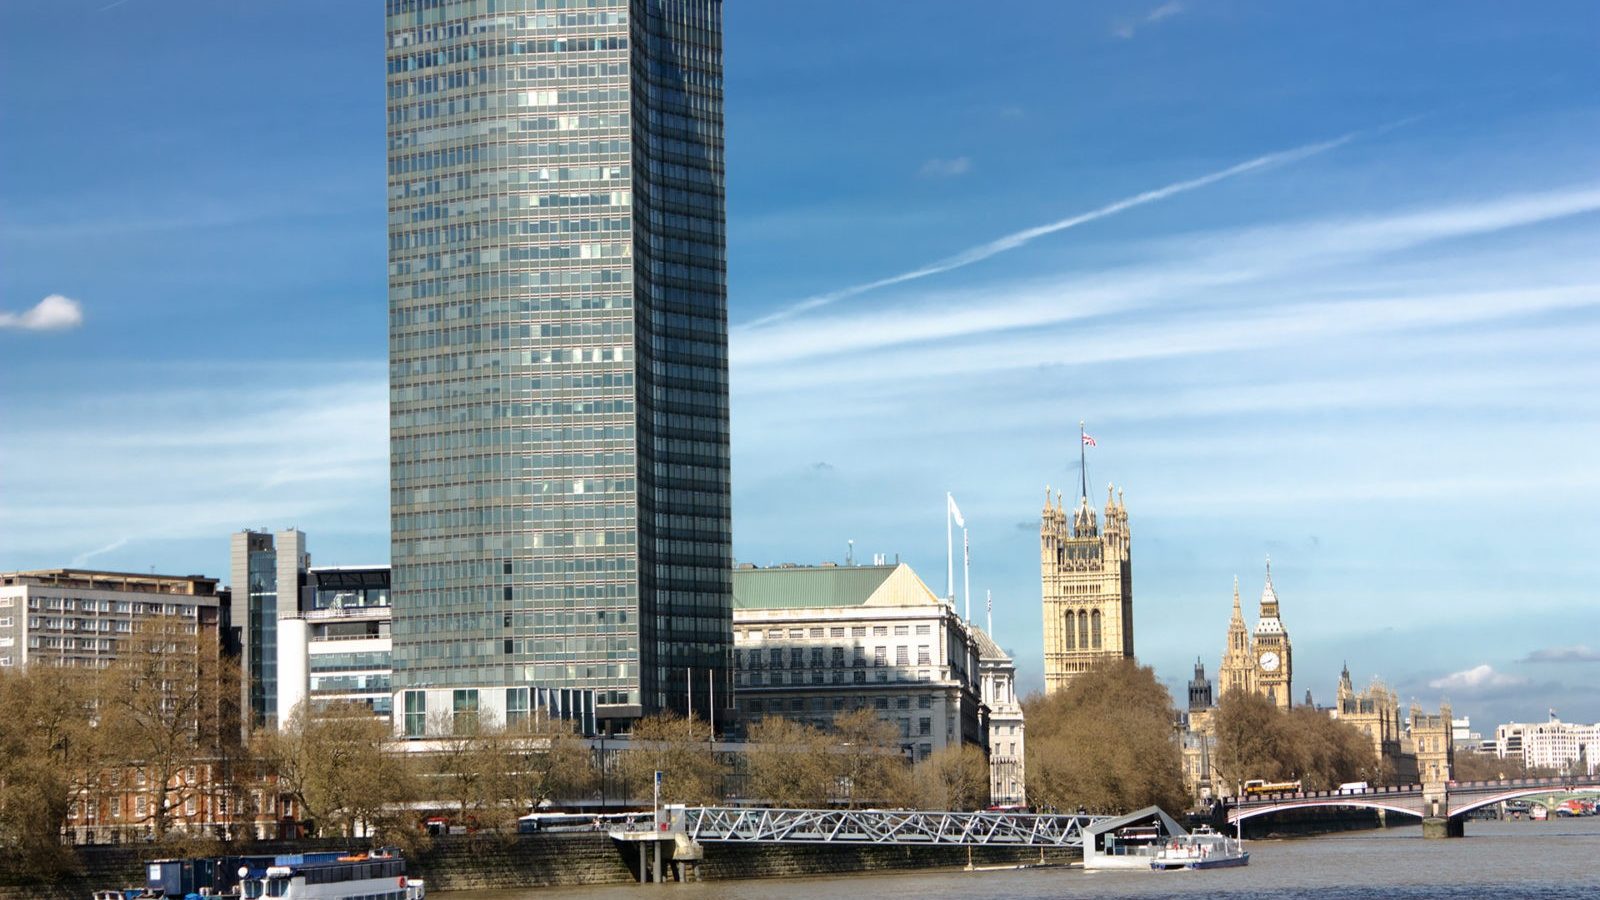 Millbank Tower, HQ of the Labour Party